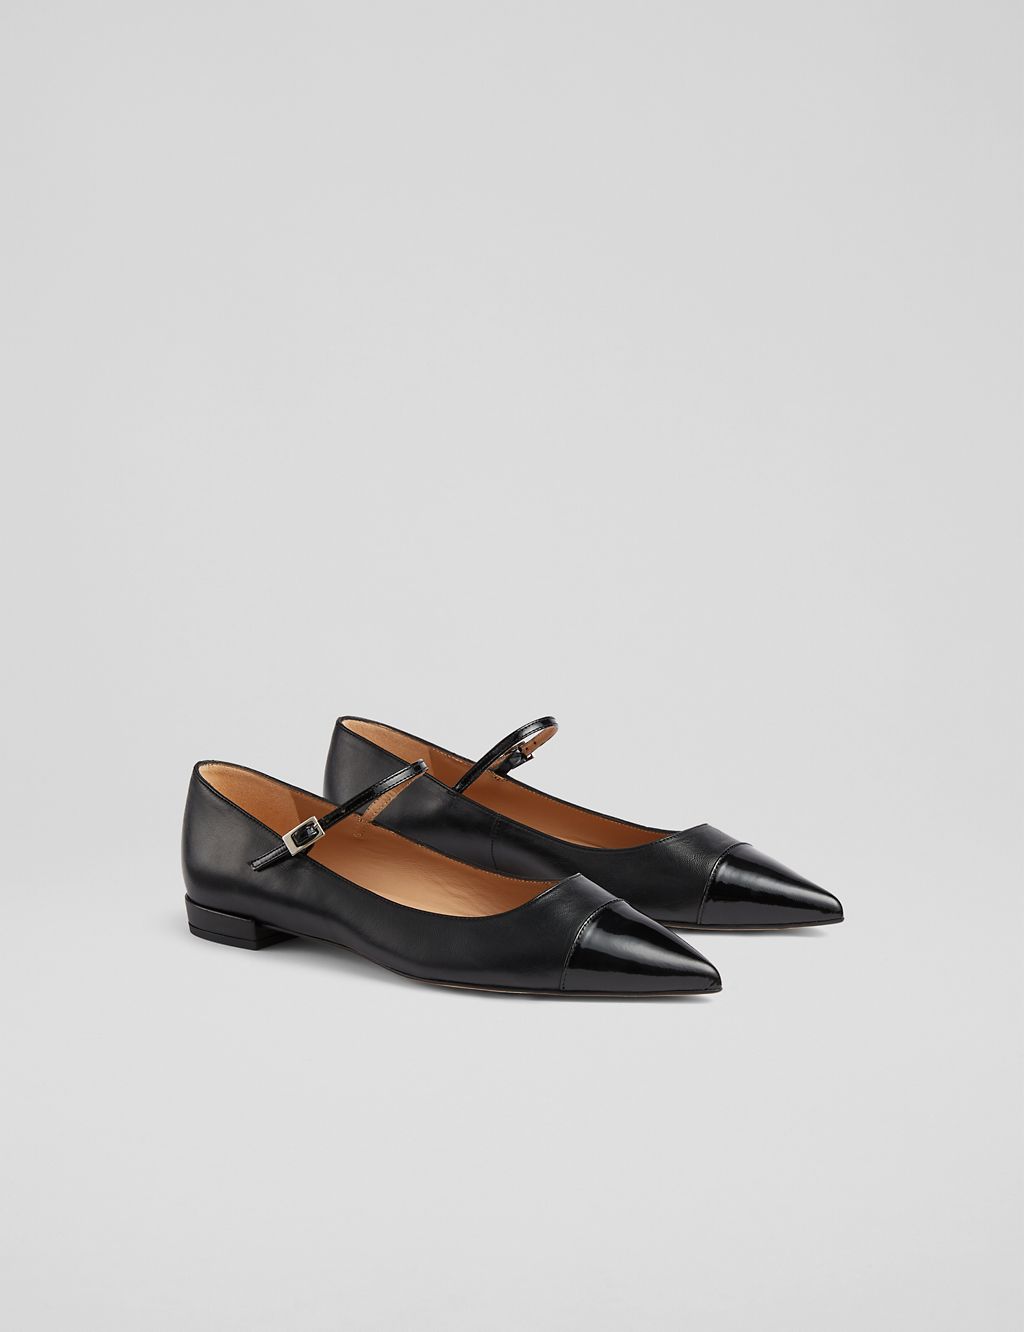 Leather Buckle Flat Pointed Pumps 4 of 4